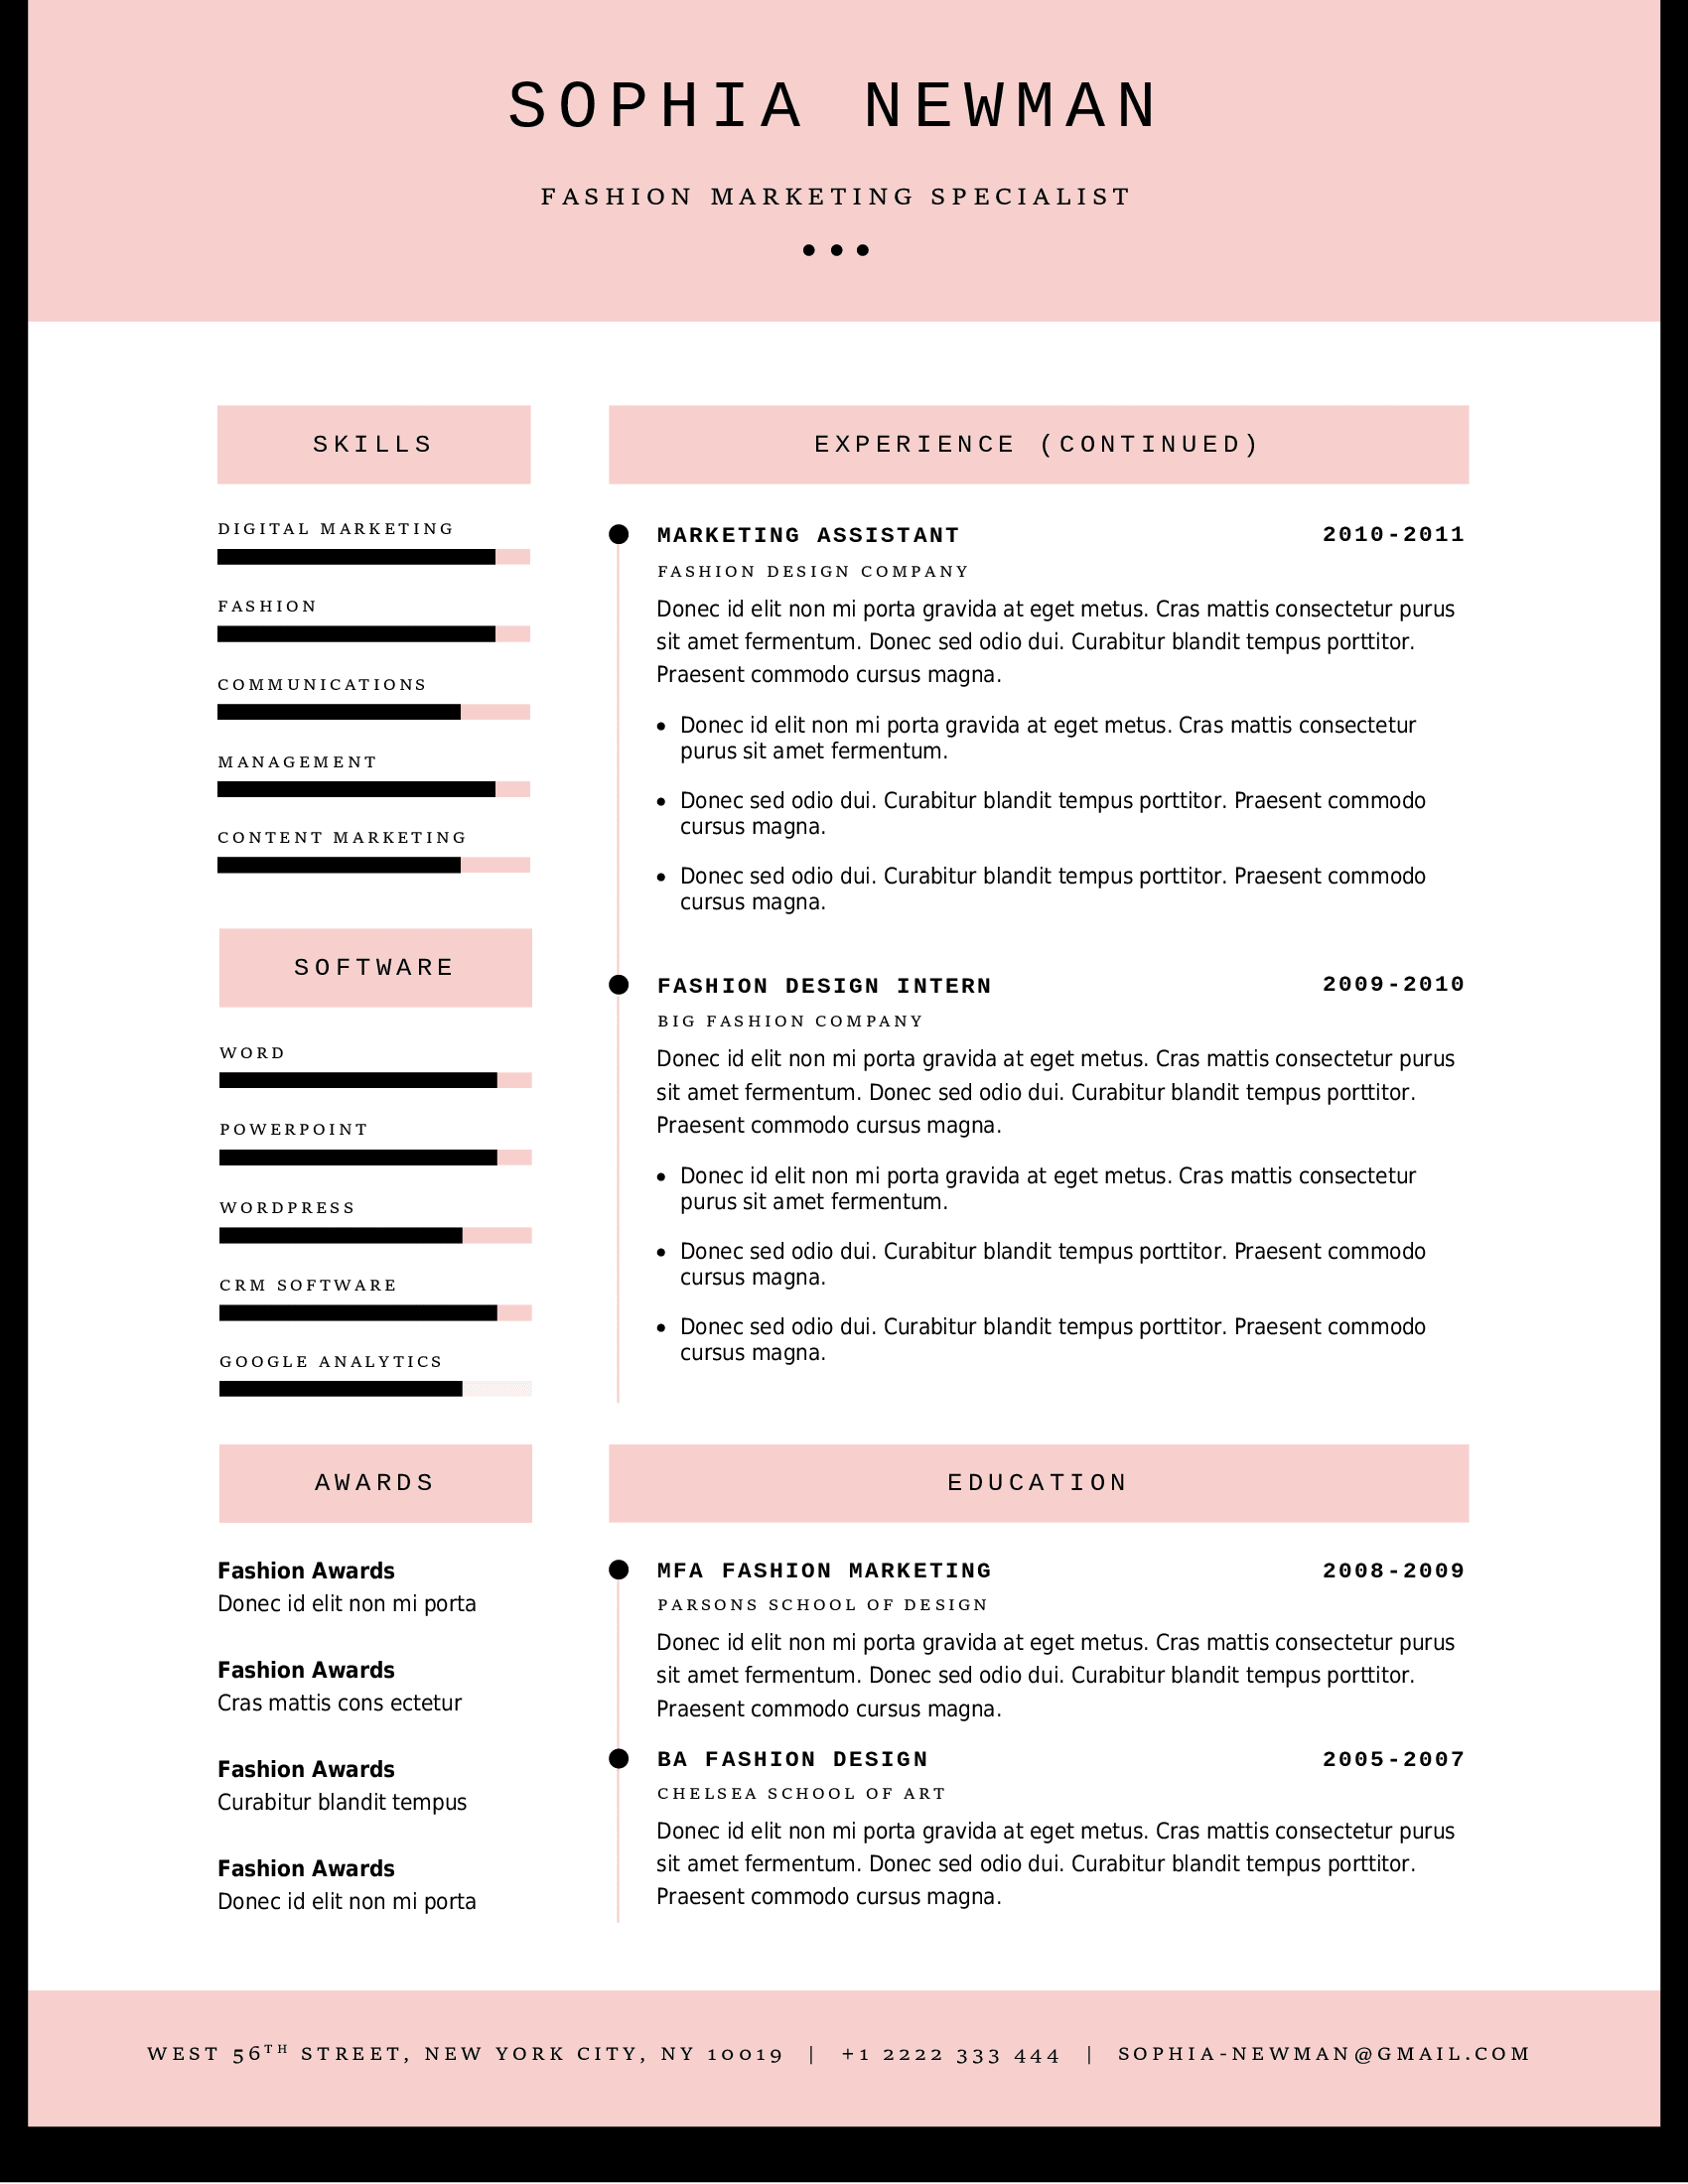 Classic Rose Resume US Letter Resume2 - Does your resume stand out from the crowd?